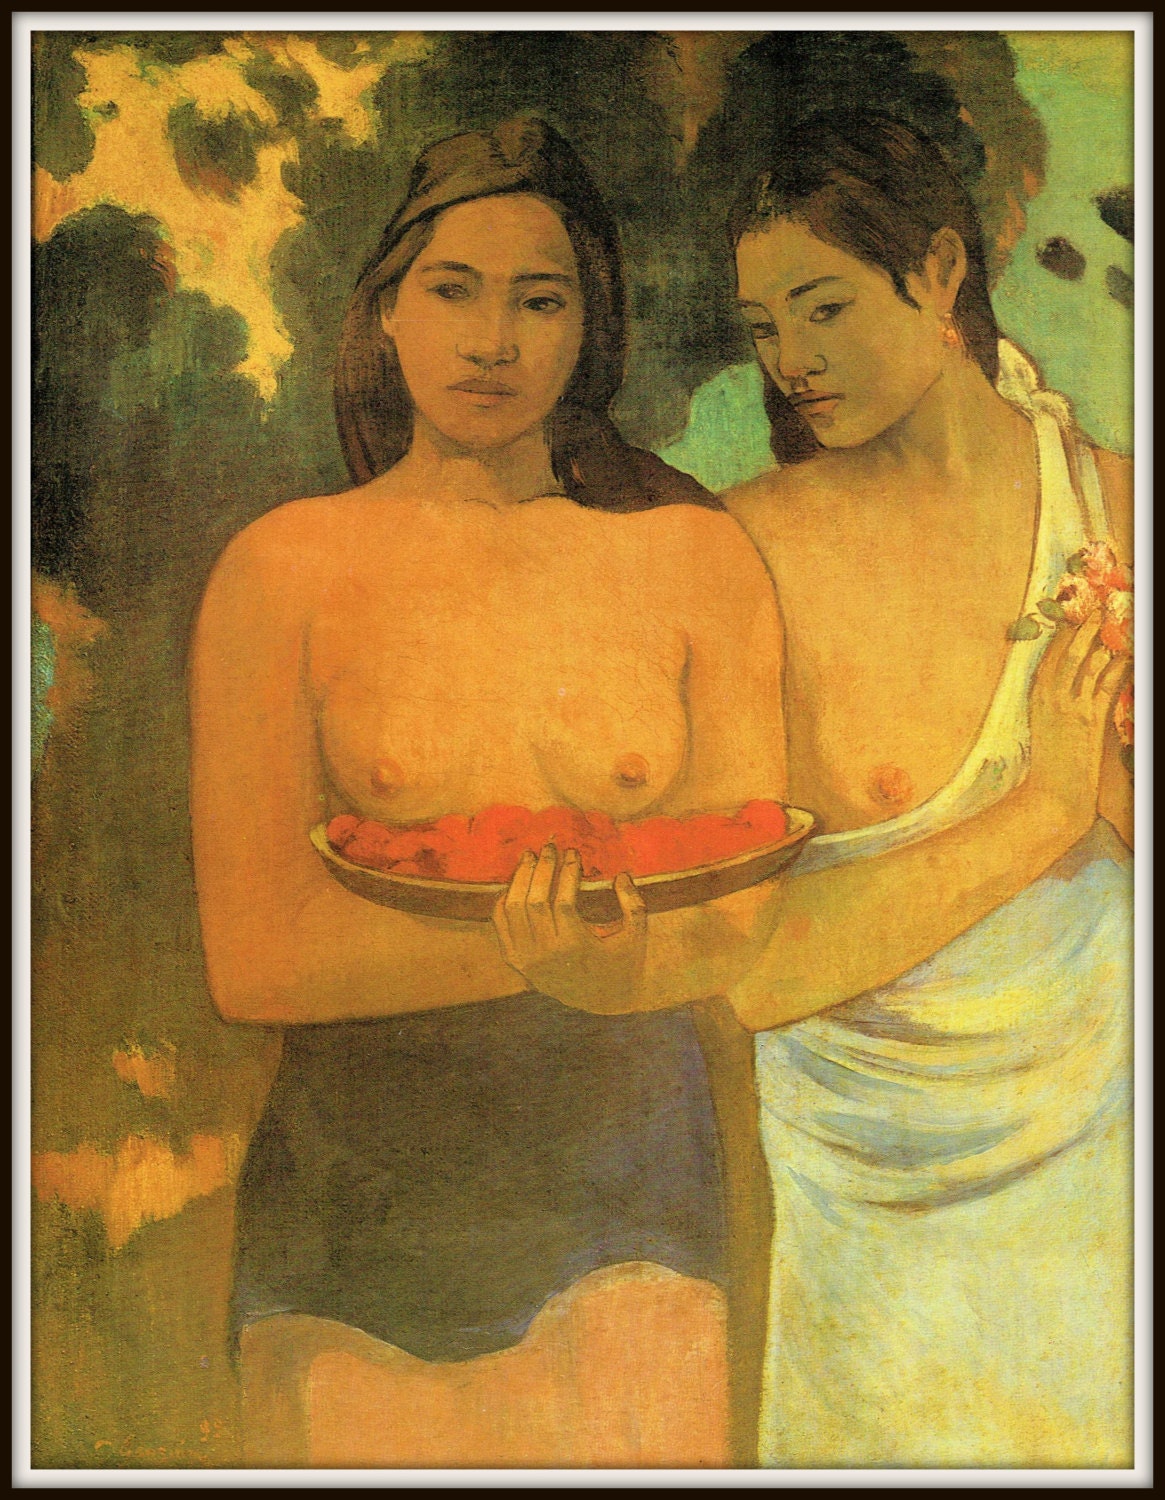 Tahitian, Women, With Mango Blossoms, Topless, Exposed Breasts, Naked  Breasts, Topless Art, Paintings of Women, Tahitian Women, Polynesian 